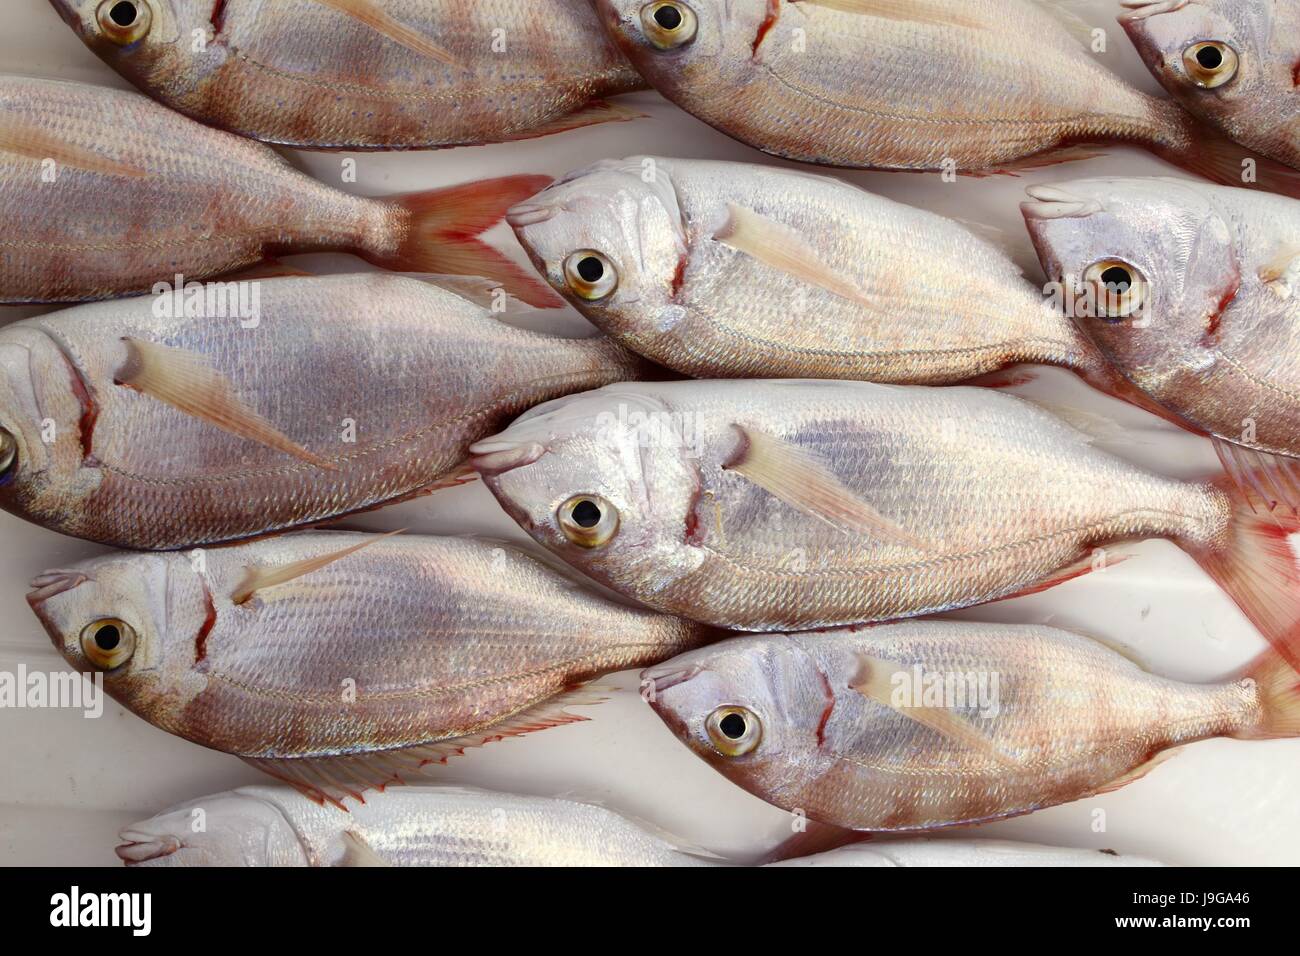 food, aliment, industry, animal, fish, skin, silver, stock exchange, Stock Photo